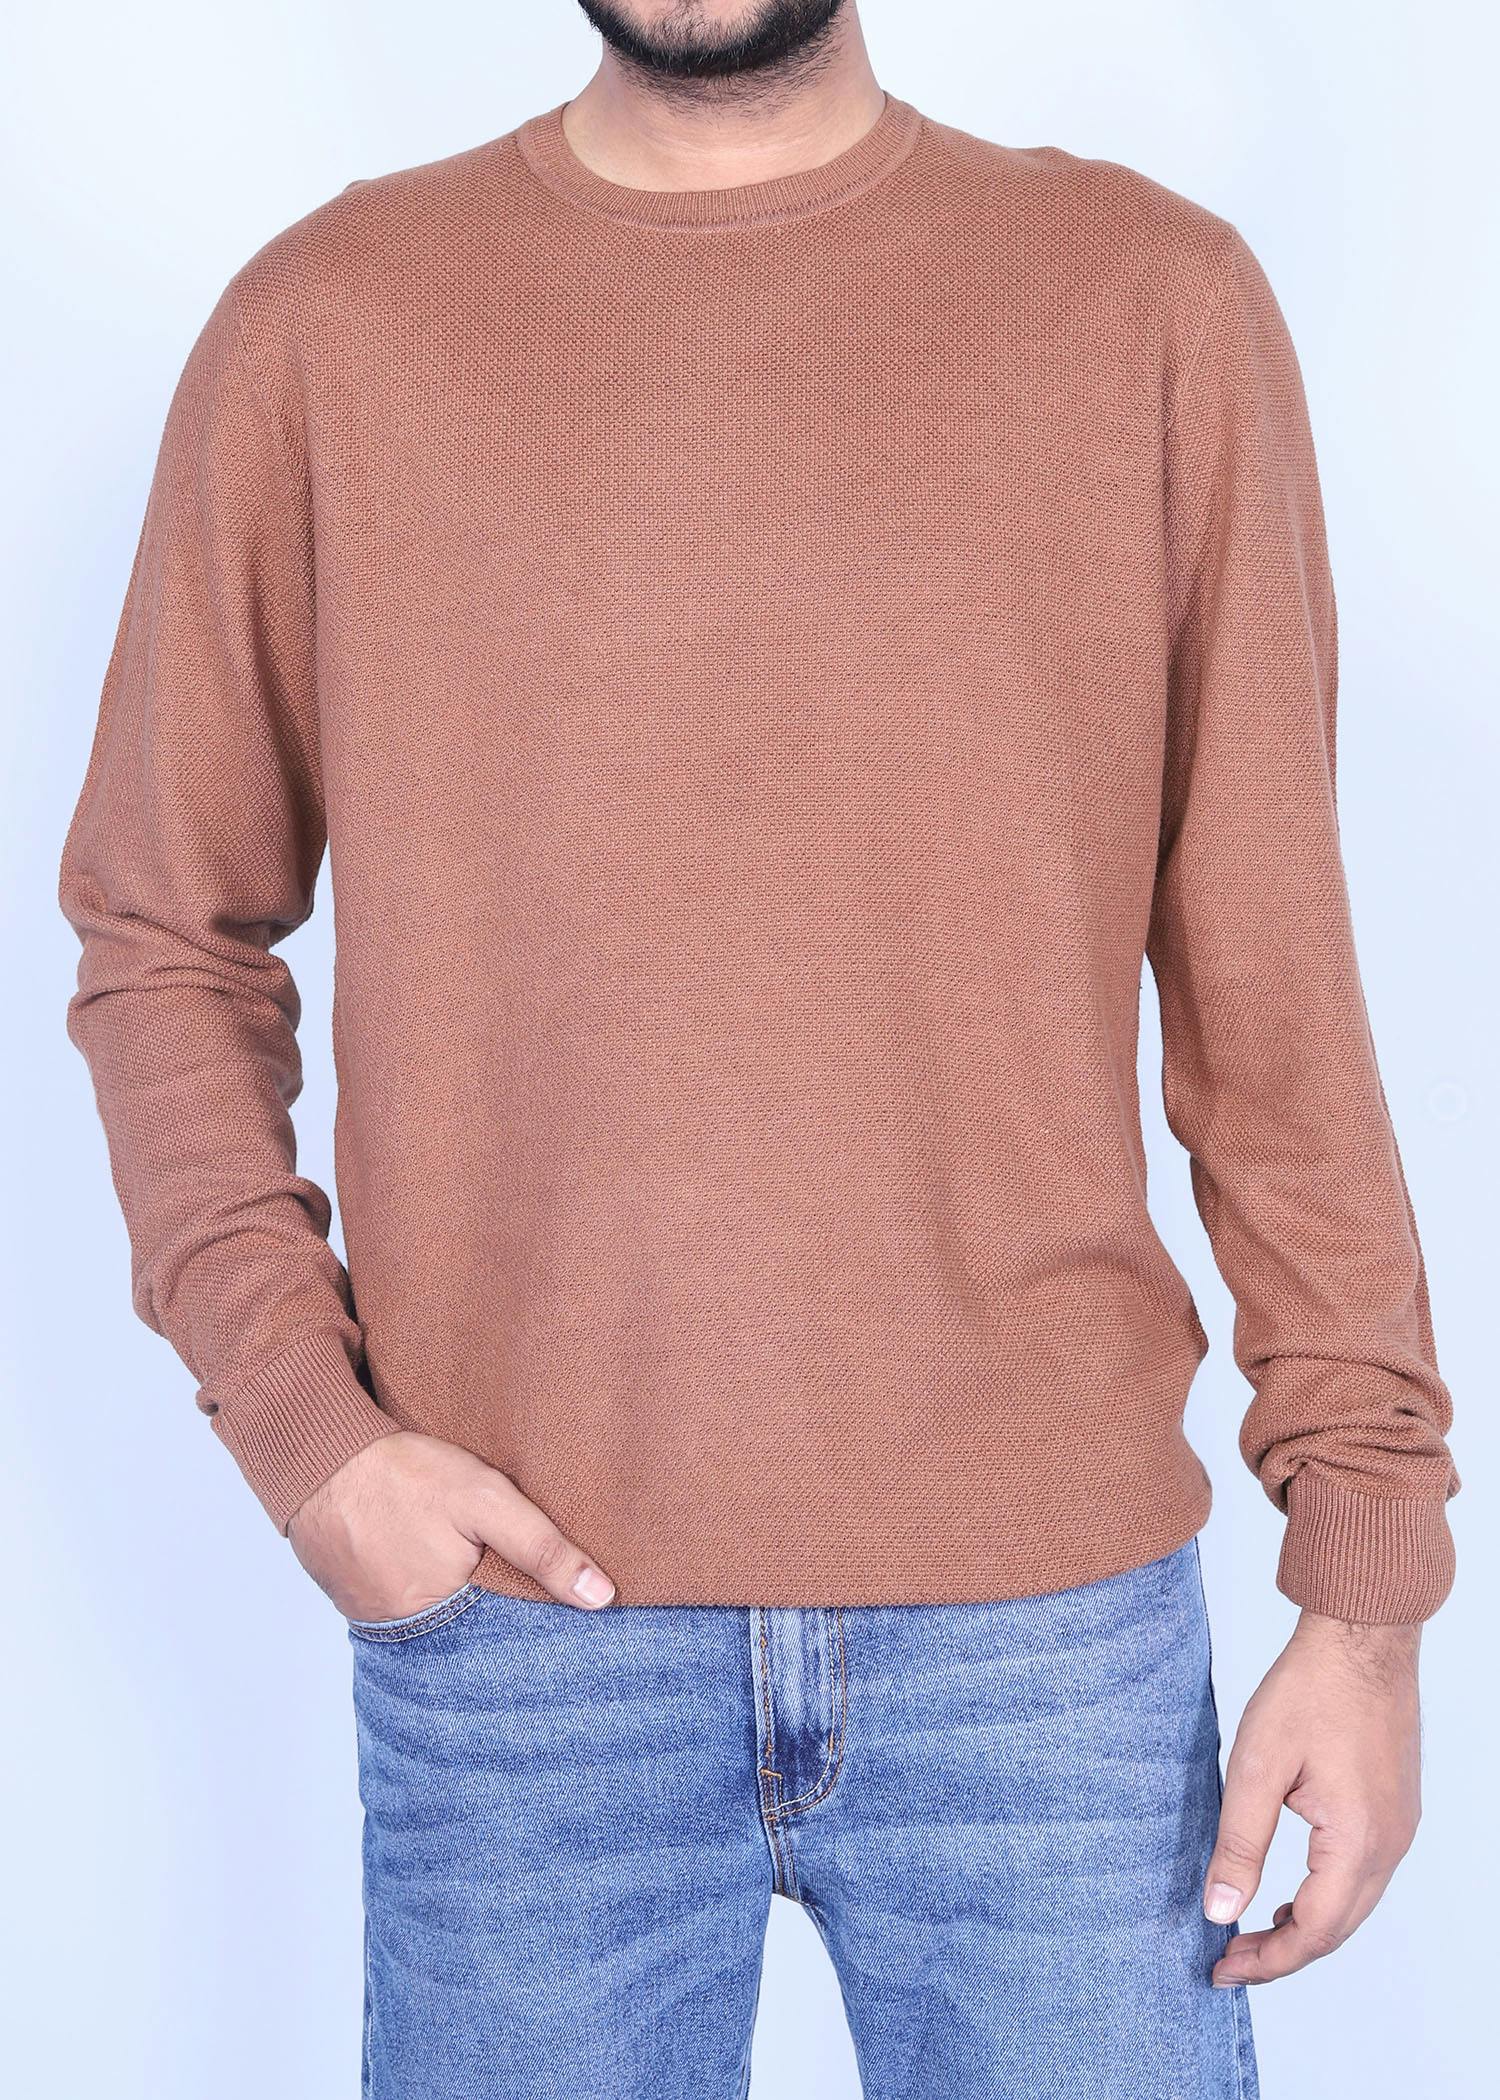 bougie bird sweater tobaco color half front view